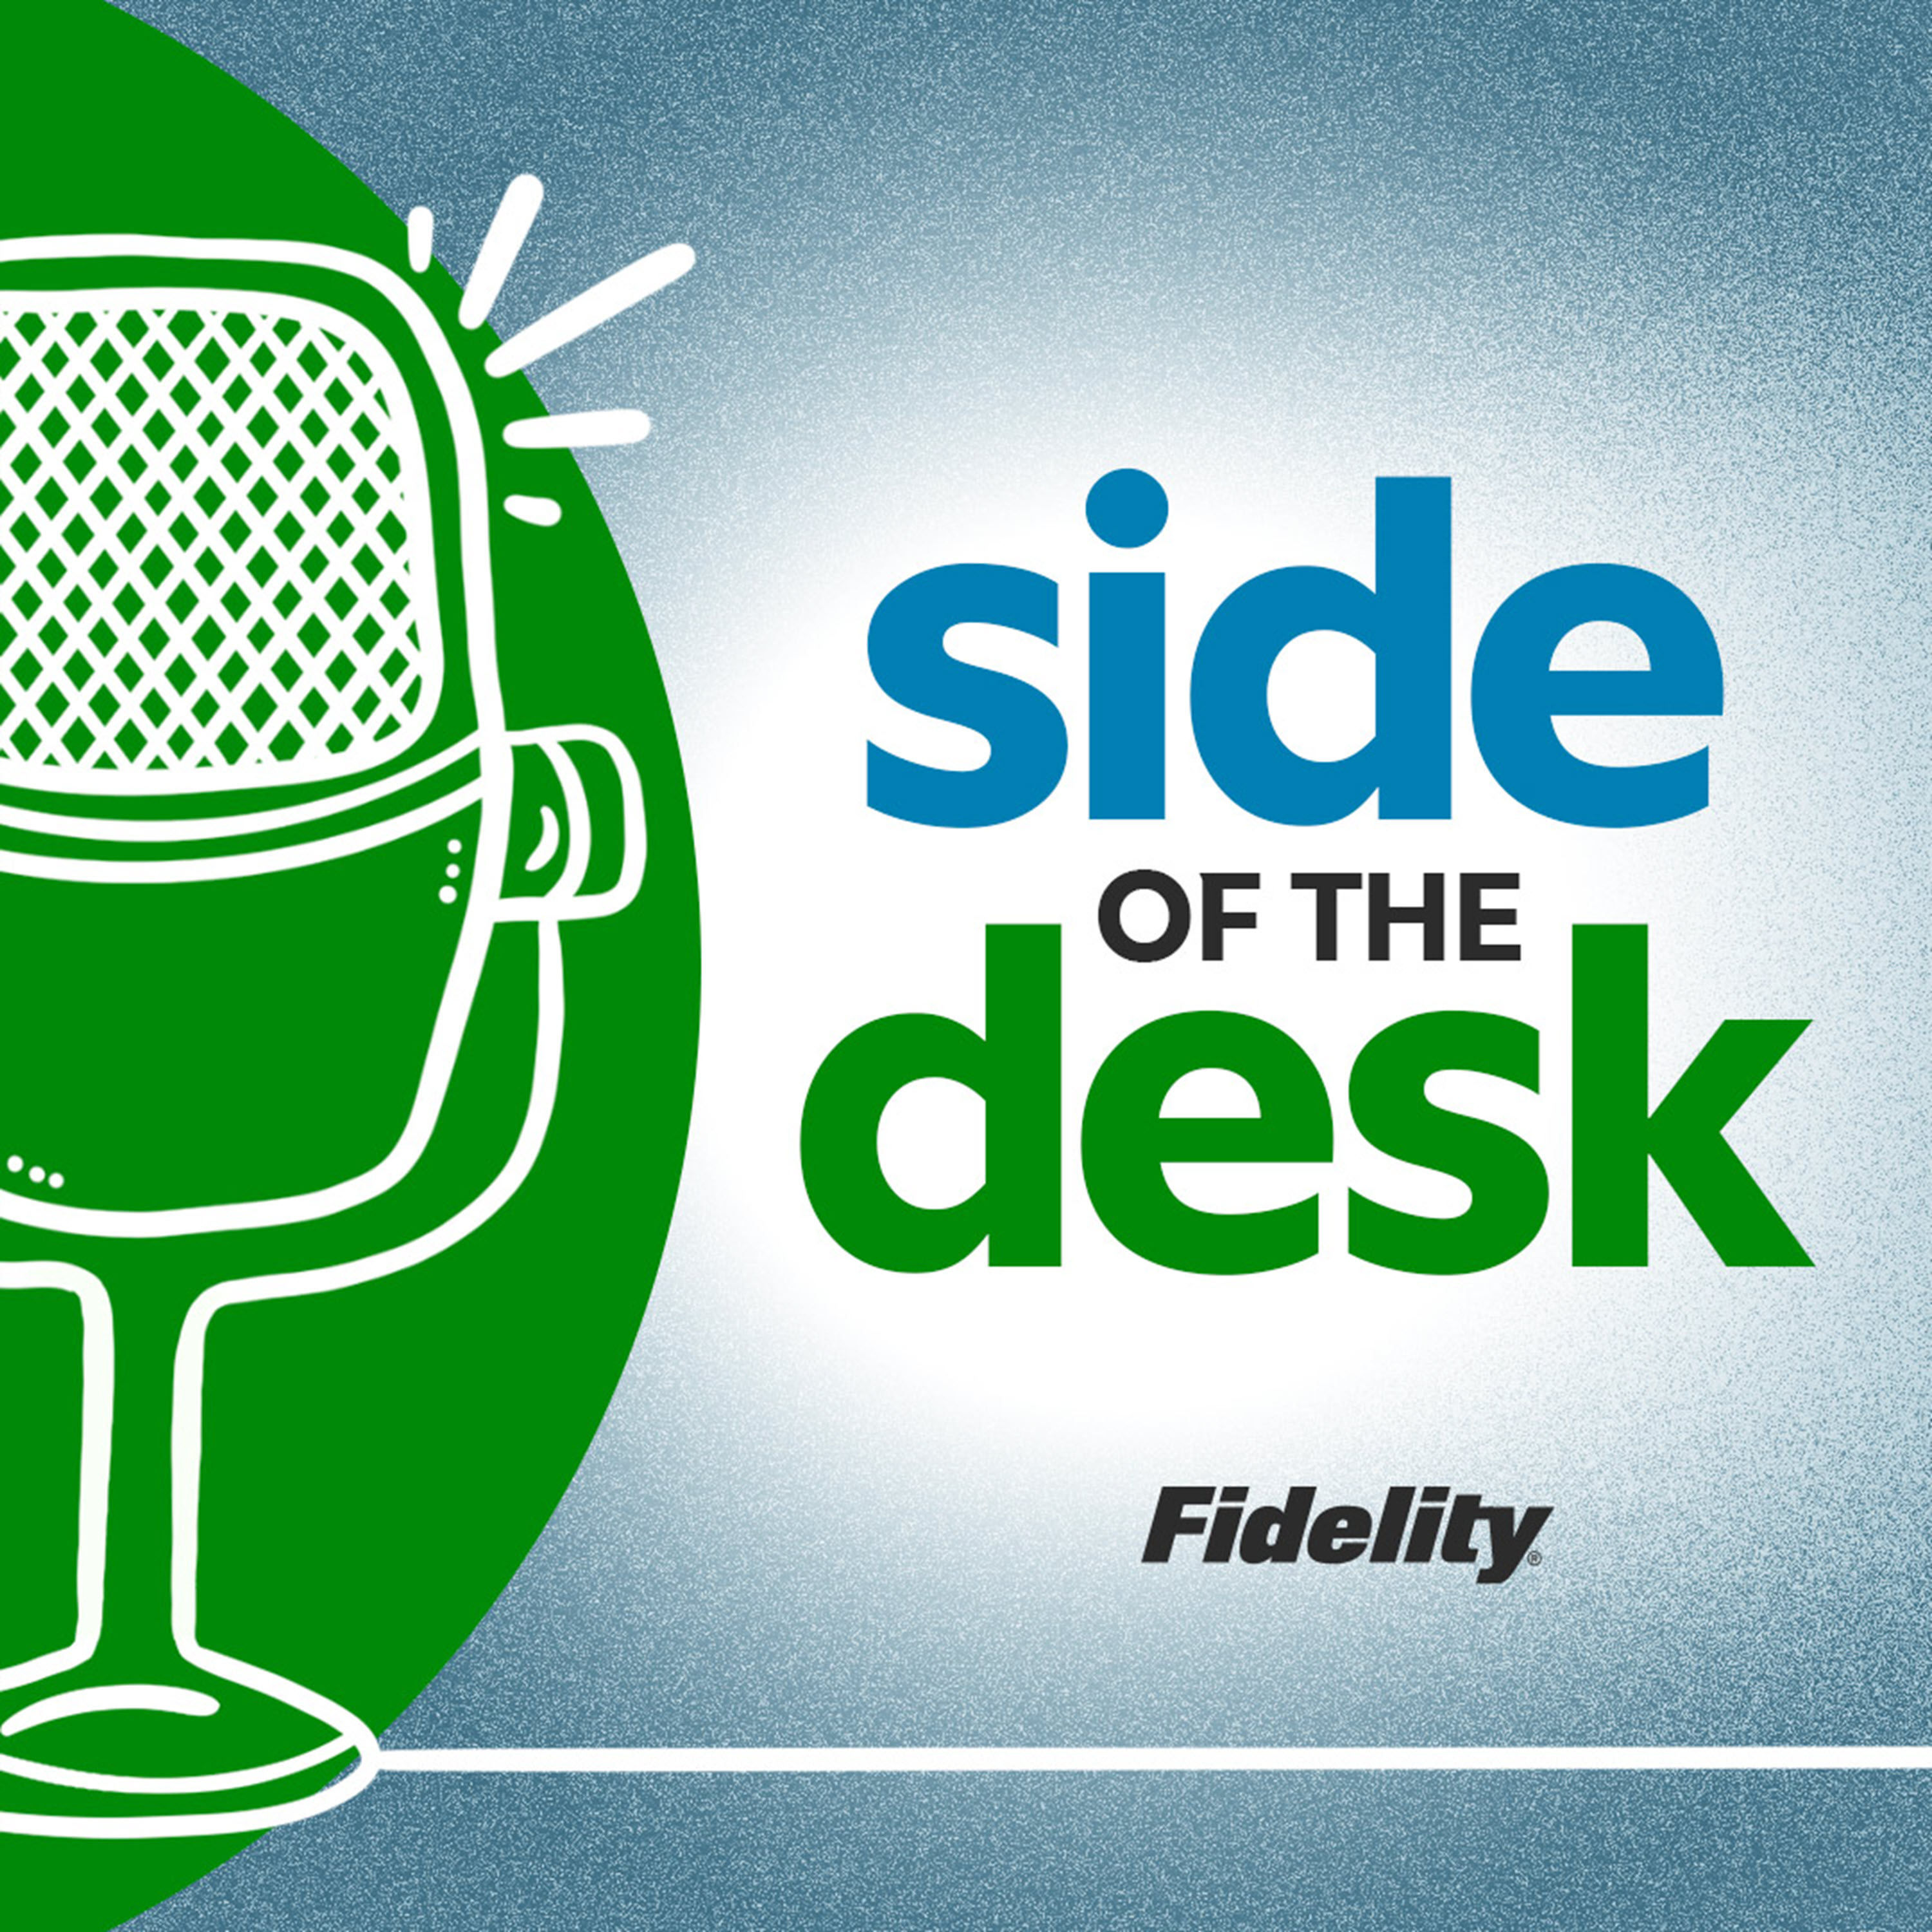 Internships at Fidelity: The Importance of Networking